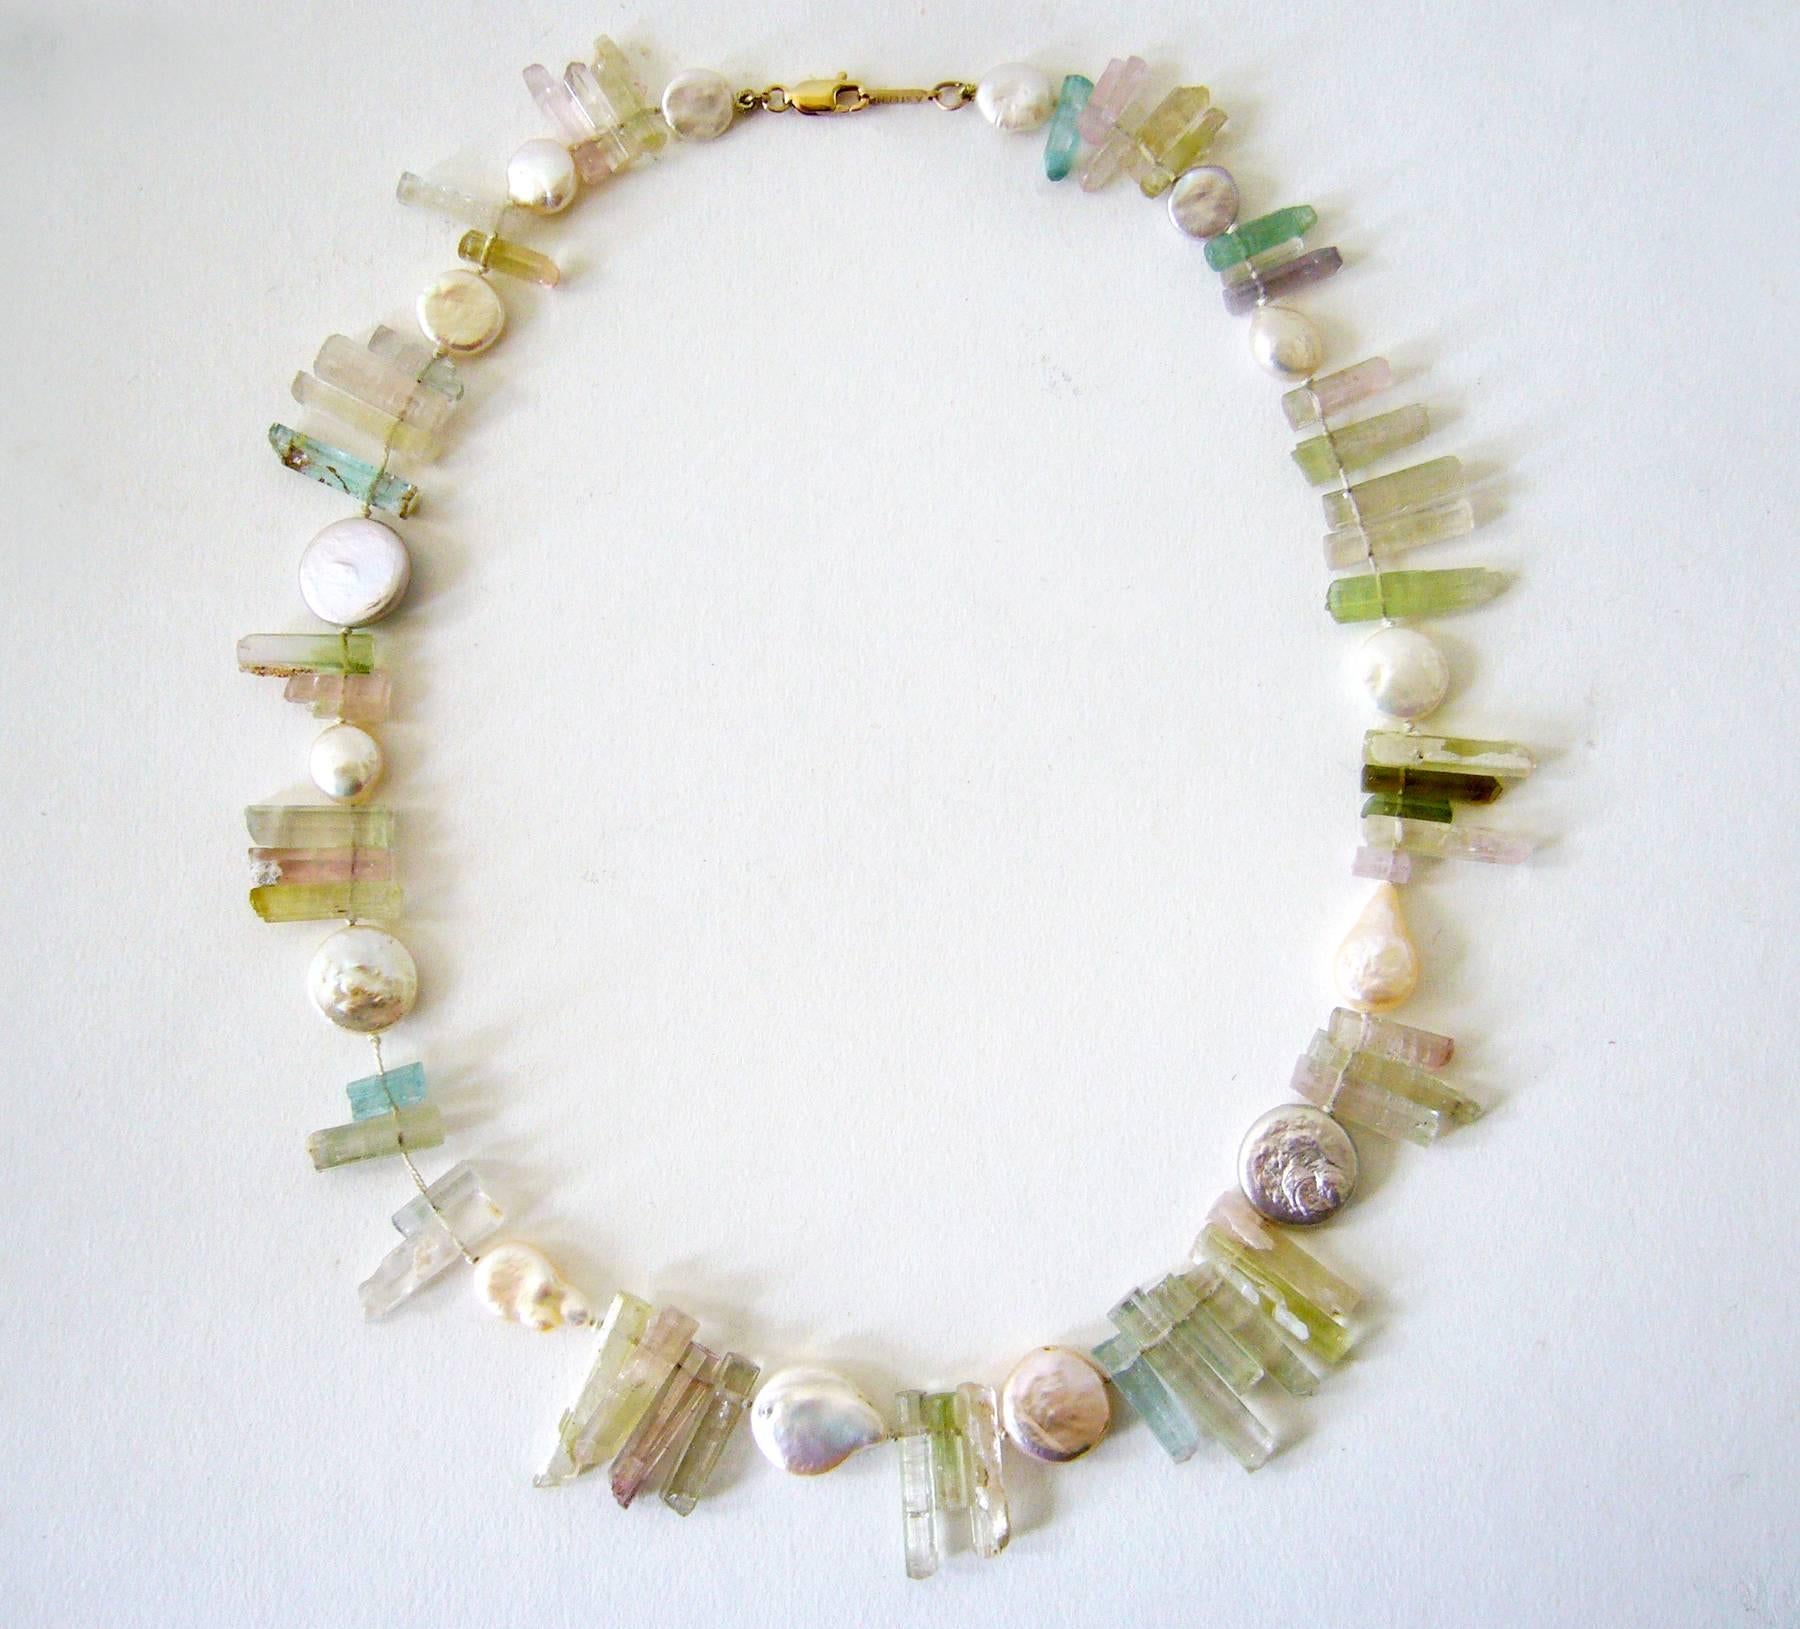 Natural gemstone crystal and mother of pearl hand strung necklace designed by Allison Stern of San Francisco, California.  Necklace measures 18" in length and is signed Allison Stern on tag at clasp.  In excellent vintage condition.  